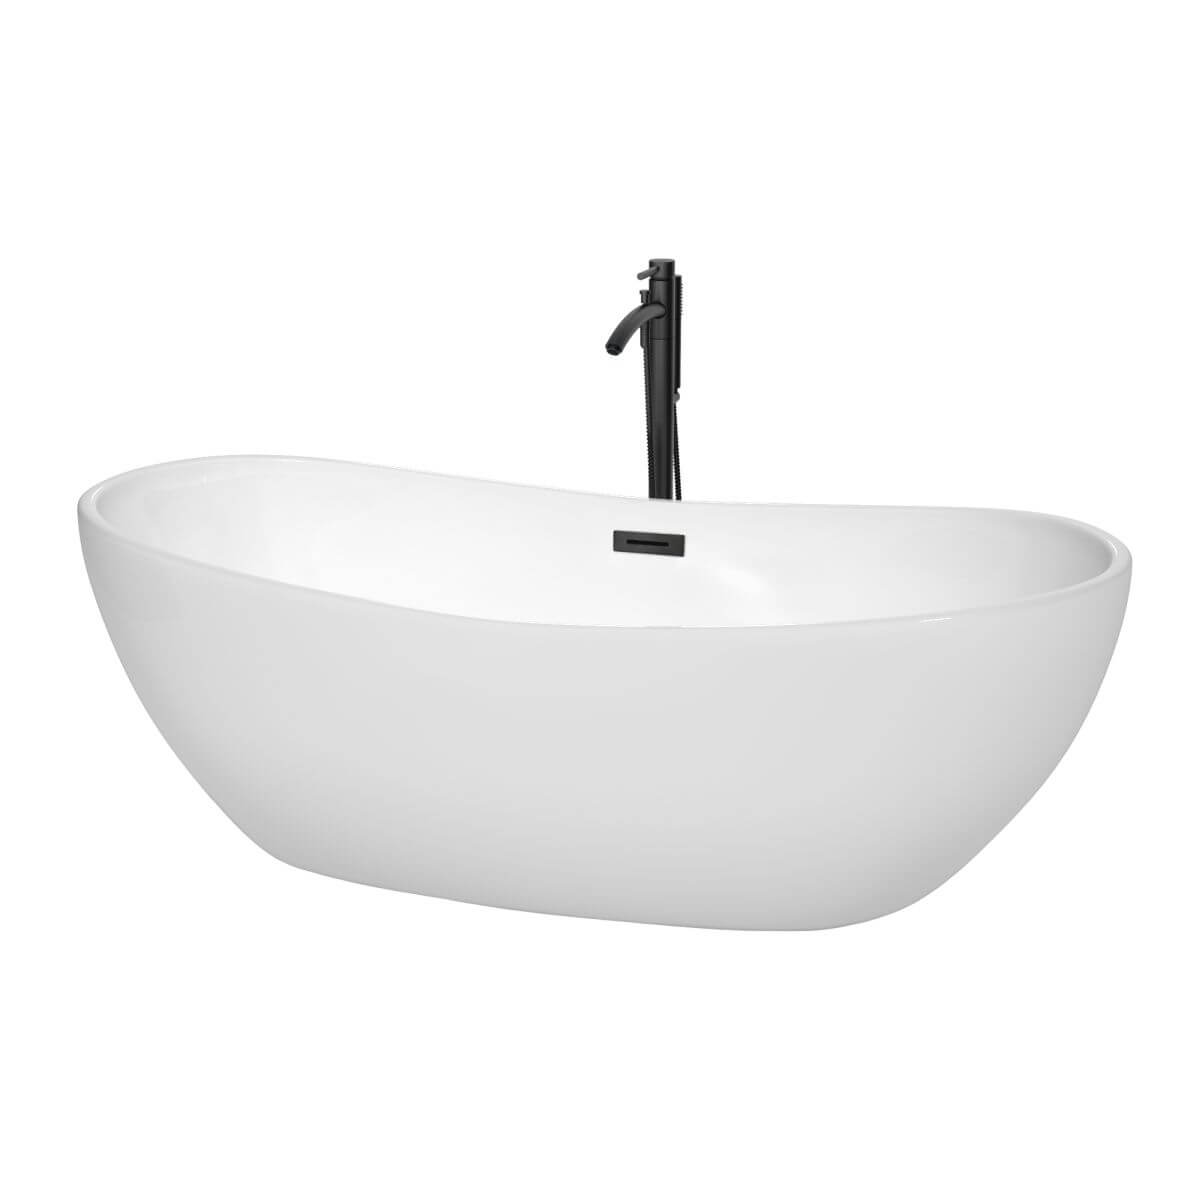 Wyndham Collection Rebecca 70 inch Freestanding Bathtub in White with Floor Mounted Faucet, Drain and Overflow Trim in Matte Black - WCOBT101470MBATPBK